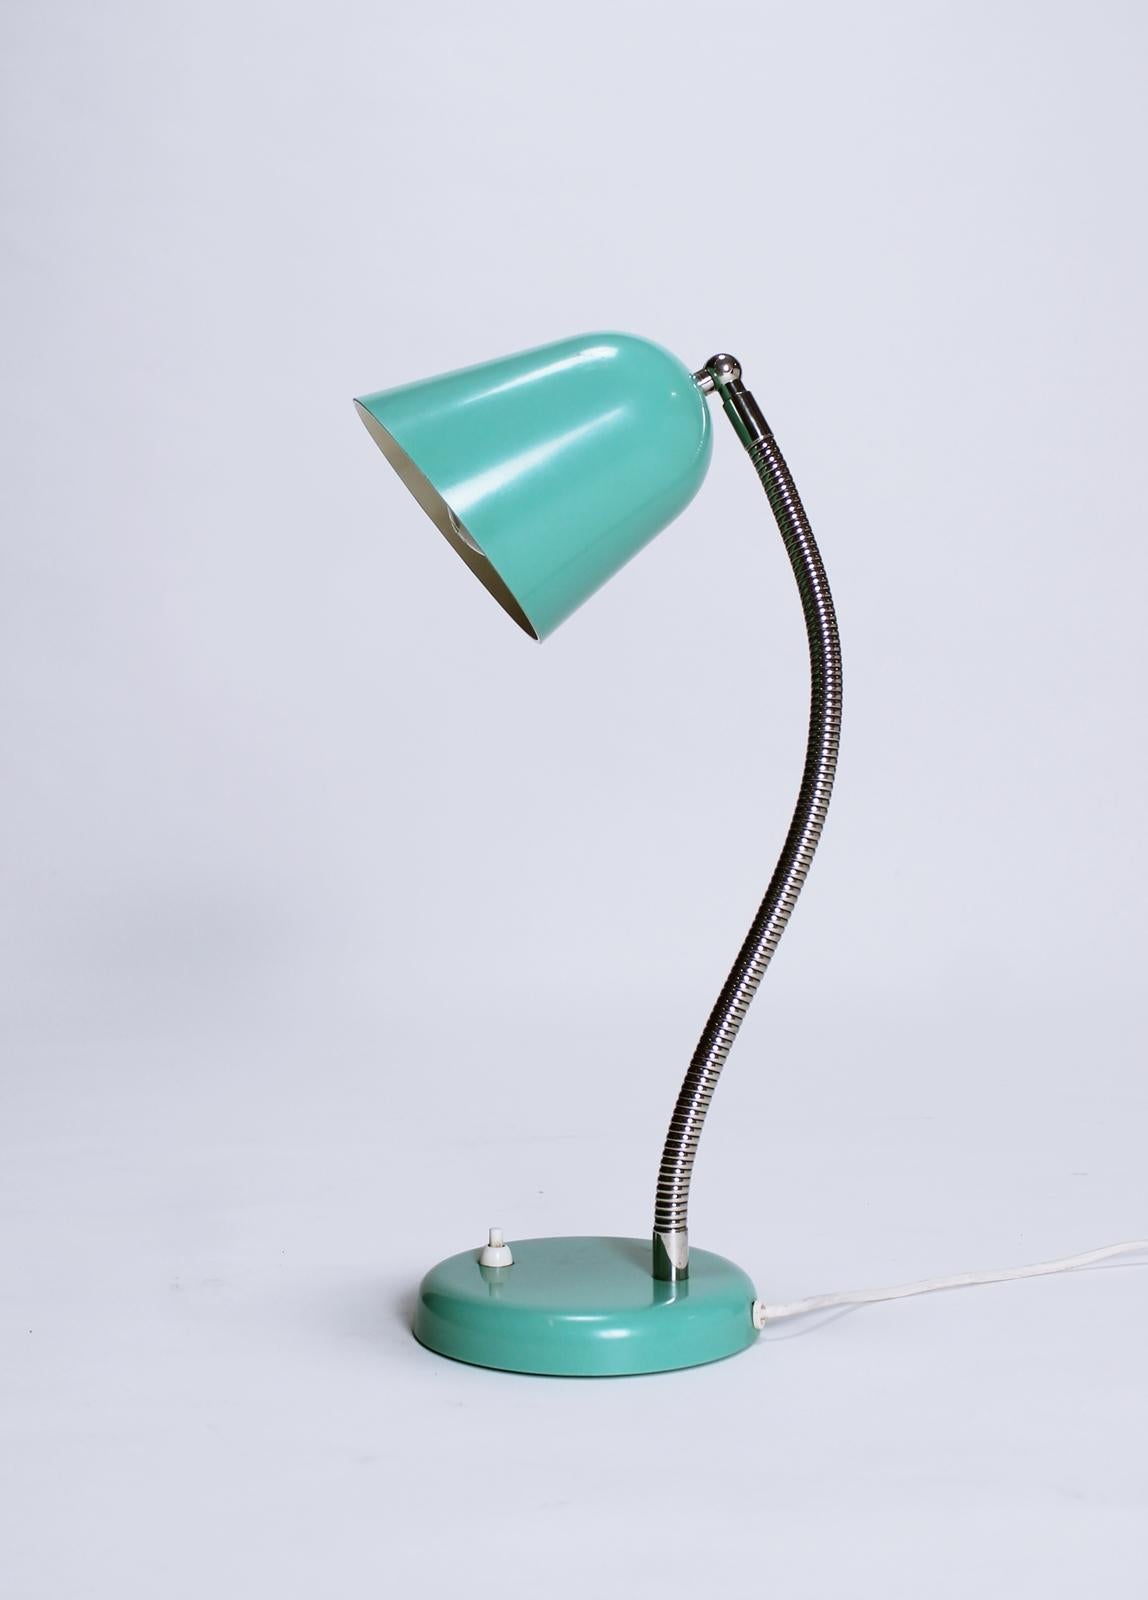 Vintage midcentury Swiss desk lamp with adjustable chrome goose neck and plastic shade.
In very good original condition.

1 x E 27 bulb.